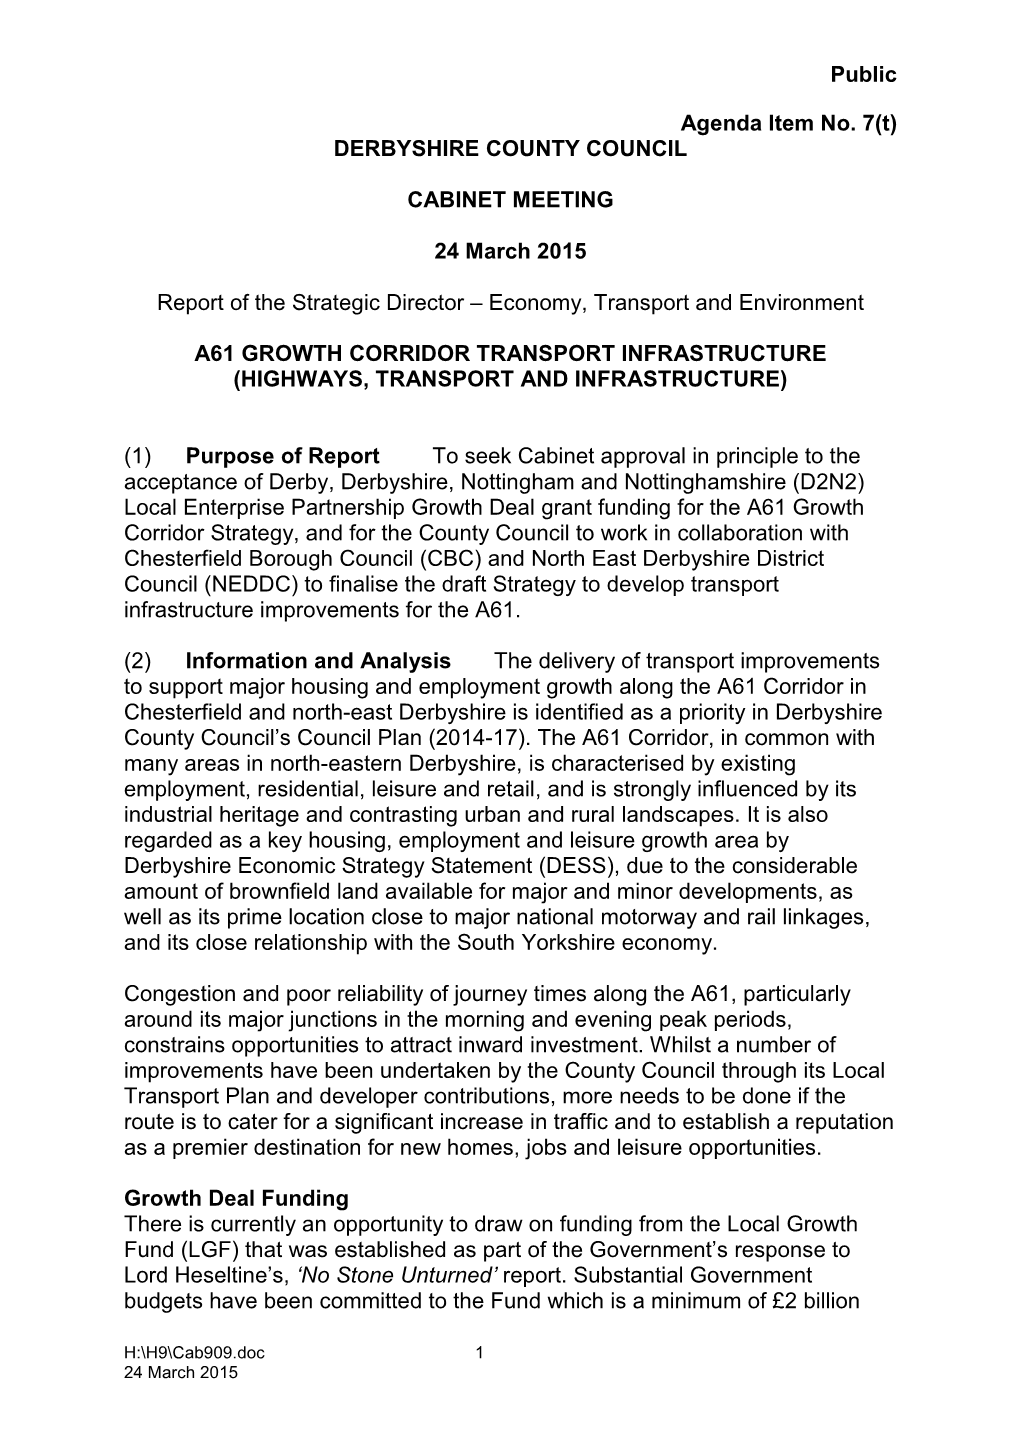 Public Agenda Item No. 7(T) DERBYSHIRE COUNTY COUNCIL CABINET MEETING 24 March 2015 Report of the Strategic Director – Economy